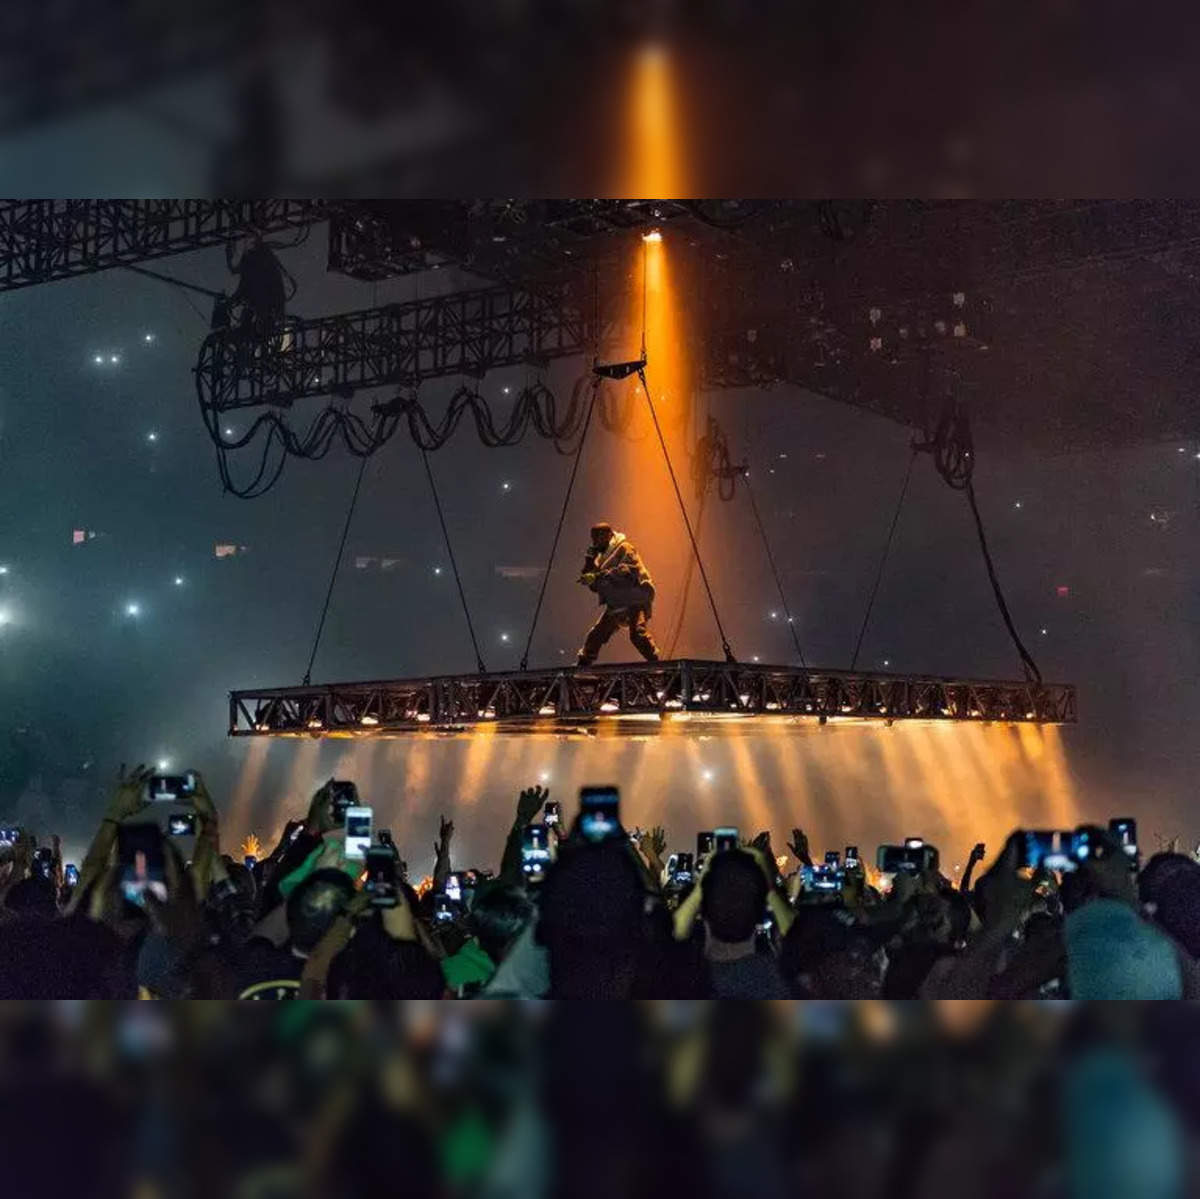 Kanye West's 2023 Album & Concert: Everything We Know